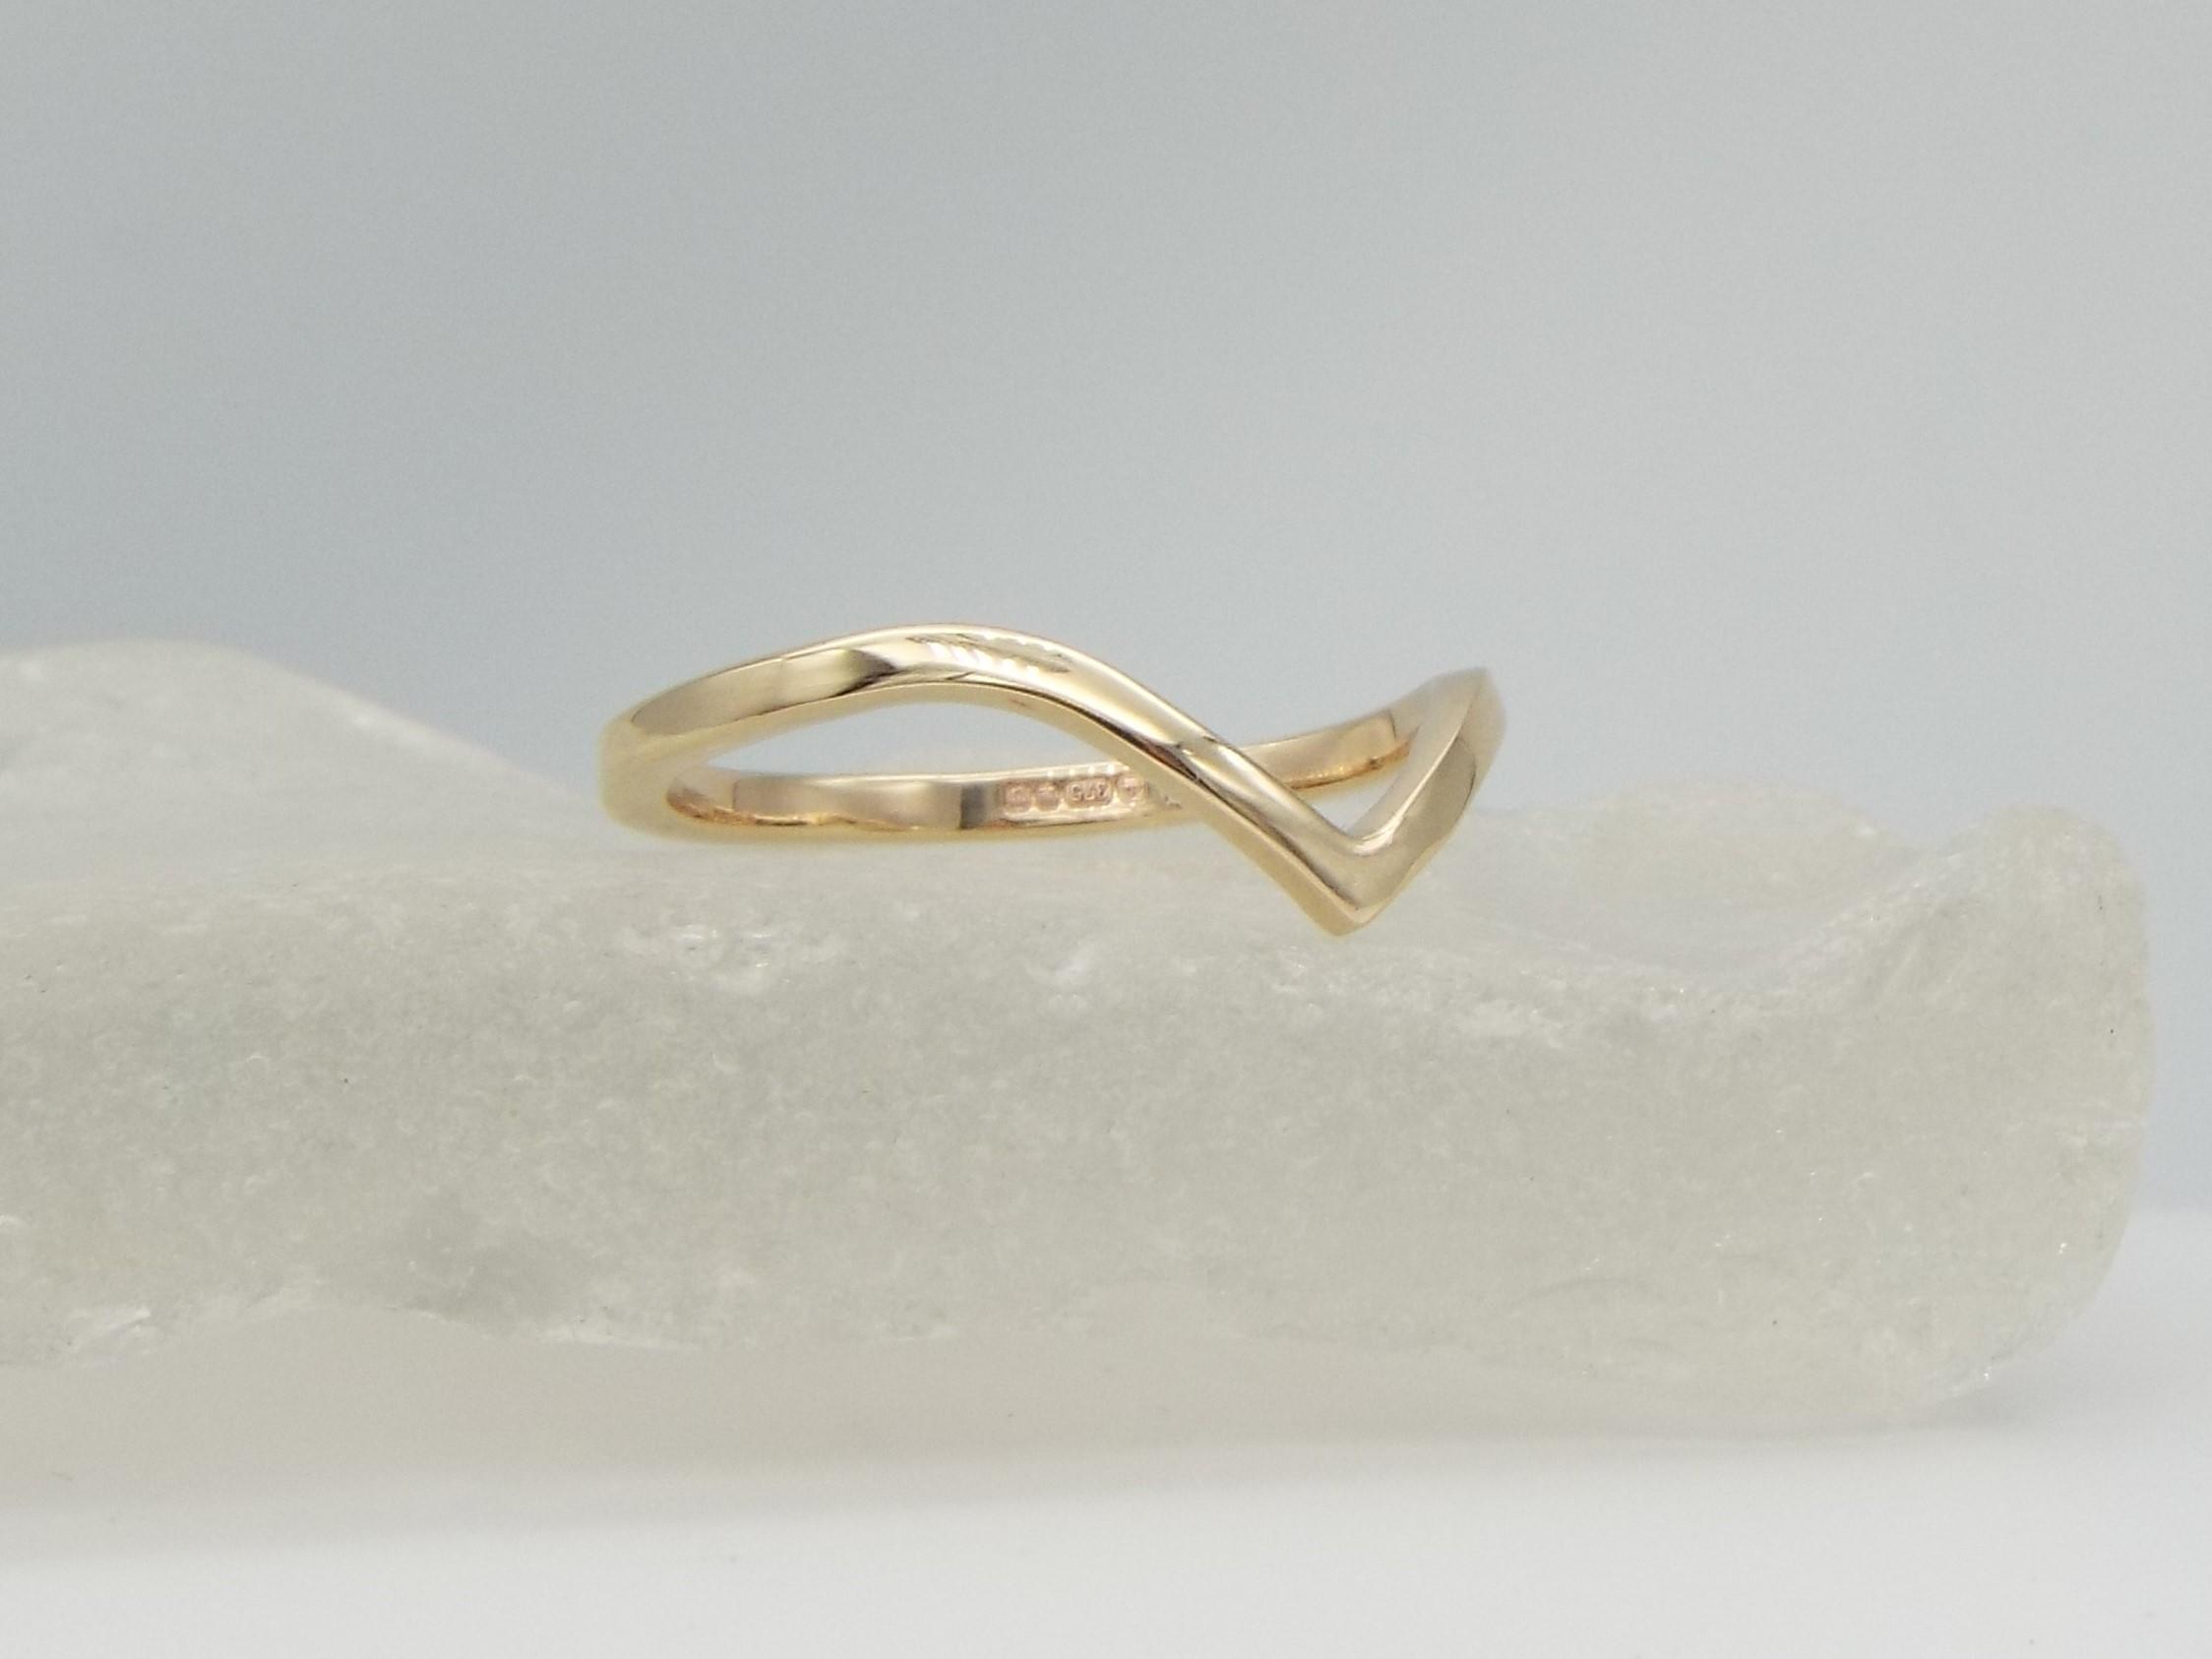 gold ring with v shaped chevron detail